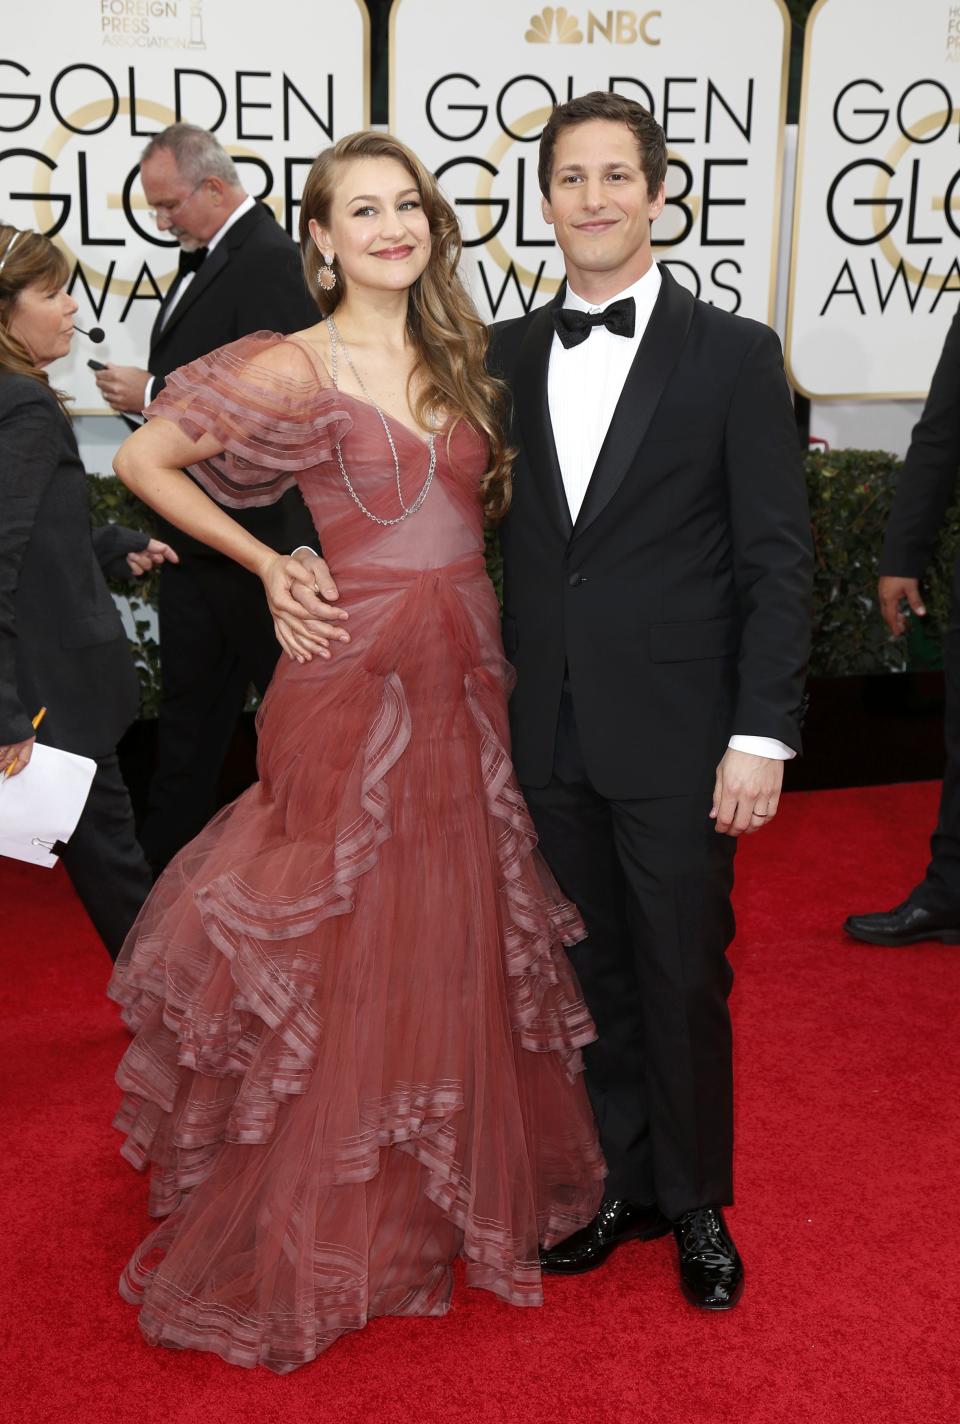 Joanna Newsom and Andy Samberg arrive at the 71st annual Golden Globe Awards in Beverly Hills